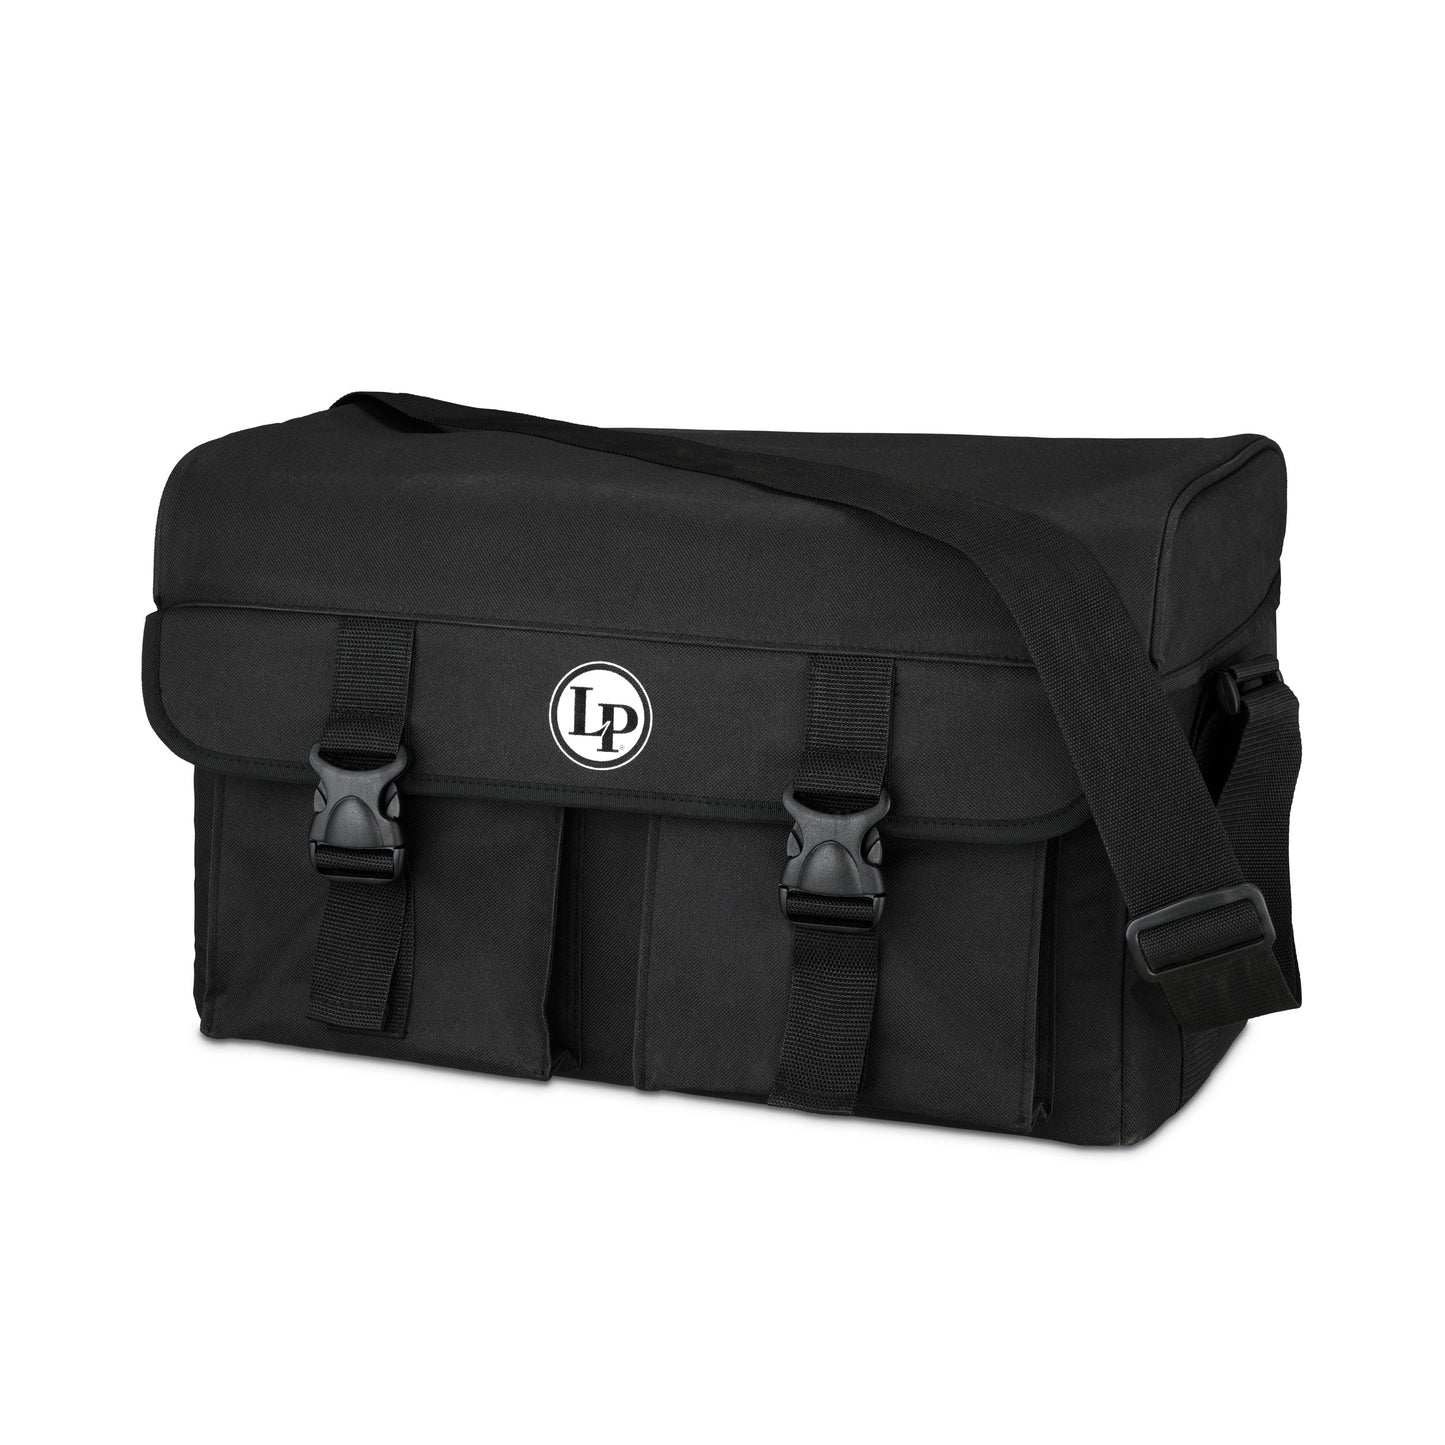 LP Percussion Toy Bag